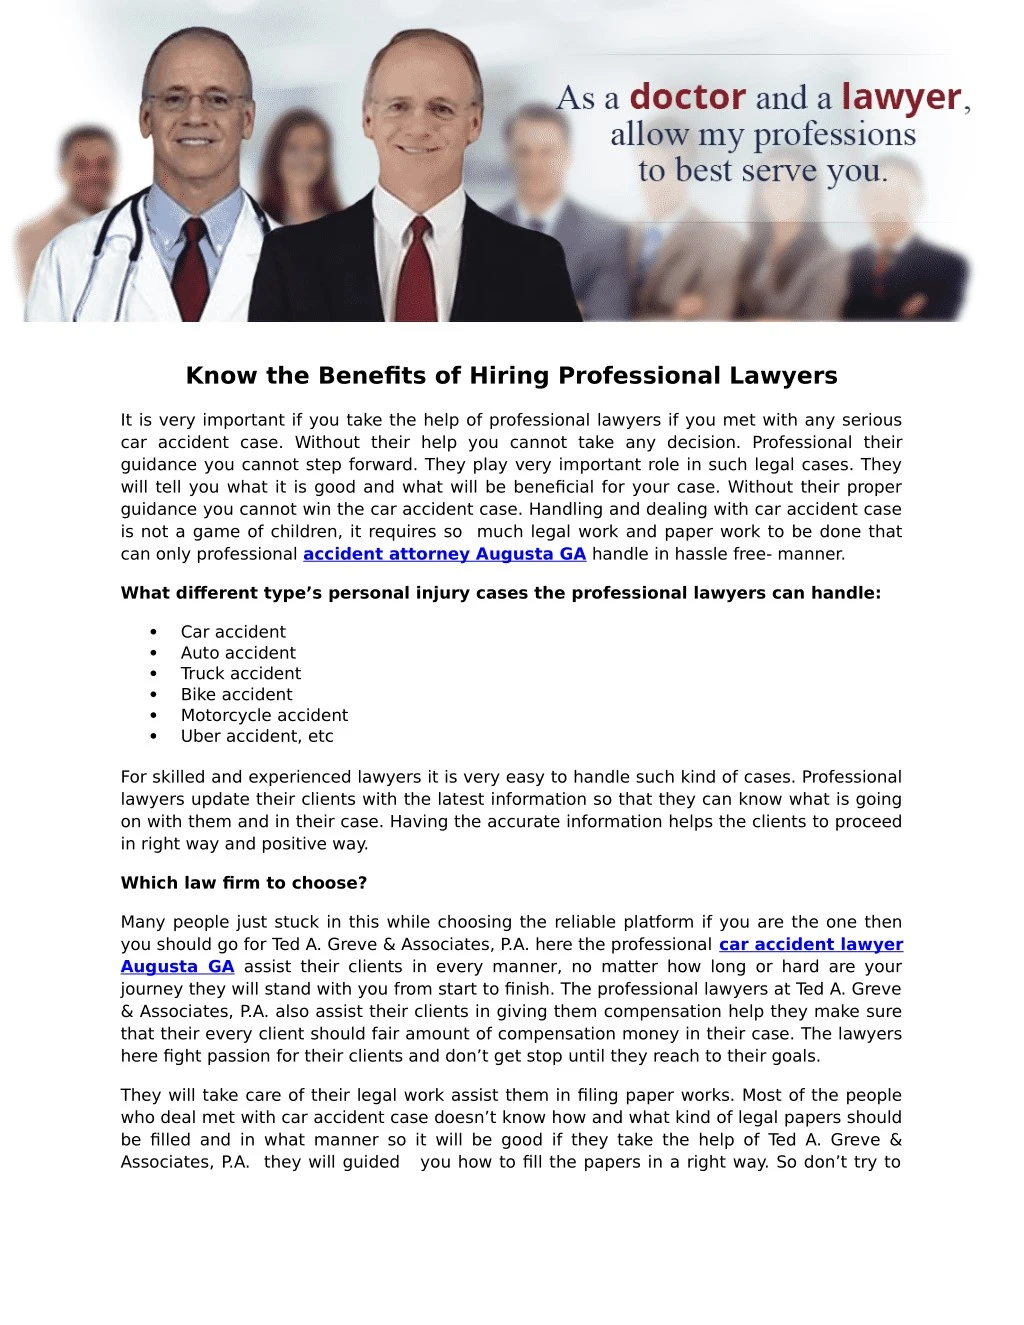 know the benefits of hiring professional lawyers